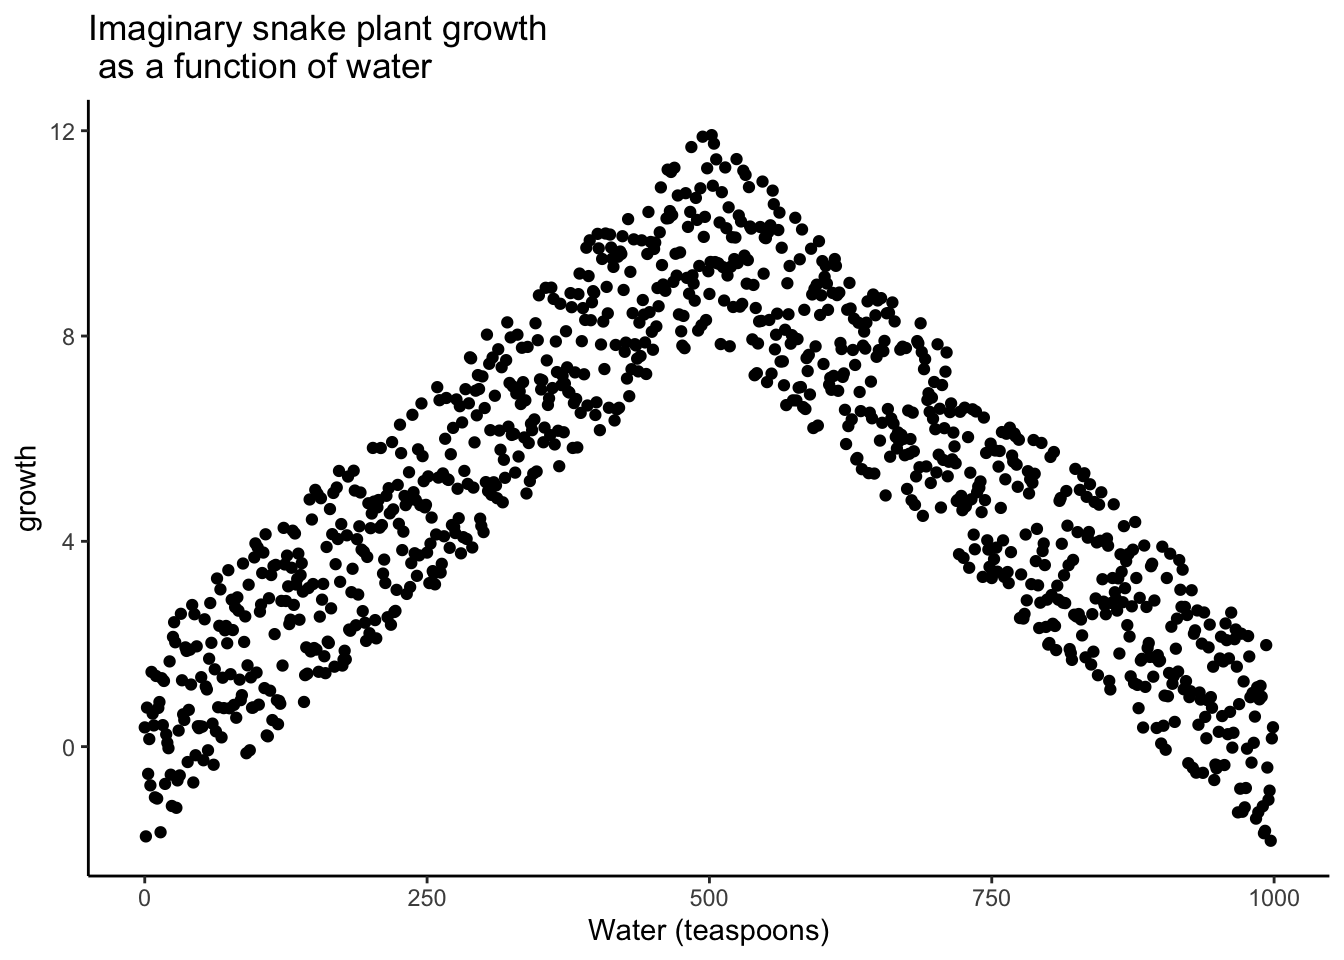 Illustration of a possible relationship between amount of water and snake plant growth. Growth goes up with water, but eventually goes back down as too much water makes snake plants die.